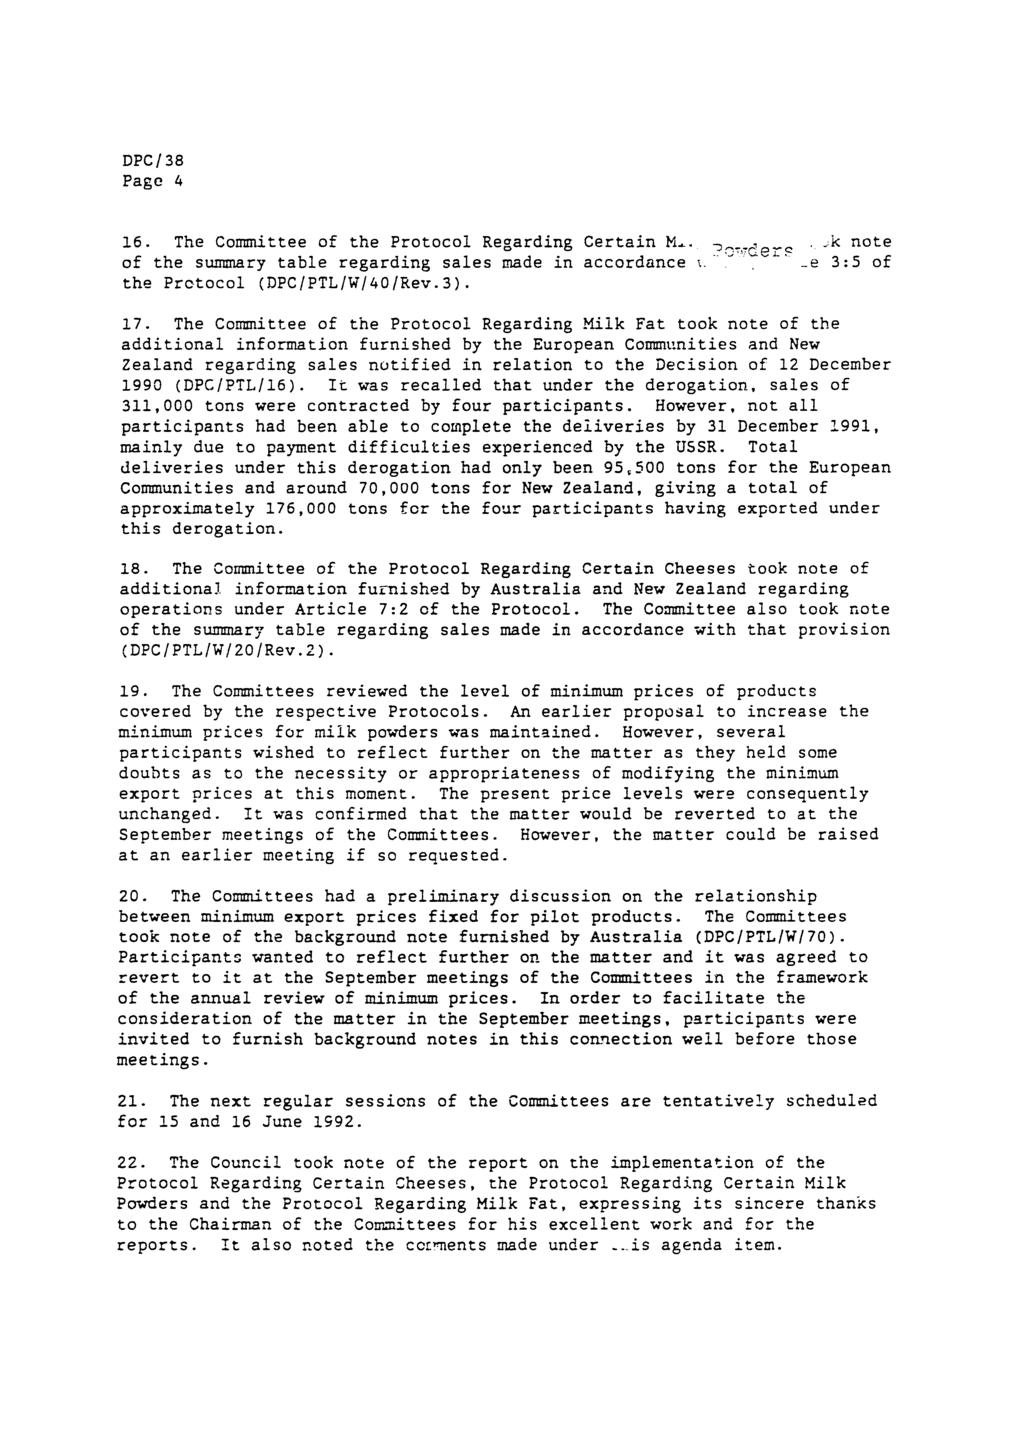 Page 4 16. The Committee of the Protocol Regarding Certain M. ;k note of the summary table regarding sales made in accordance e _e 3:5 of the Protocol (DPC/PTL/W/40/Rev.3). 17.